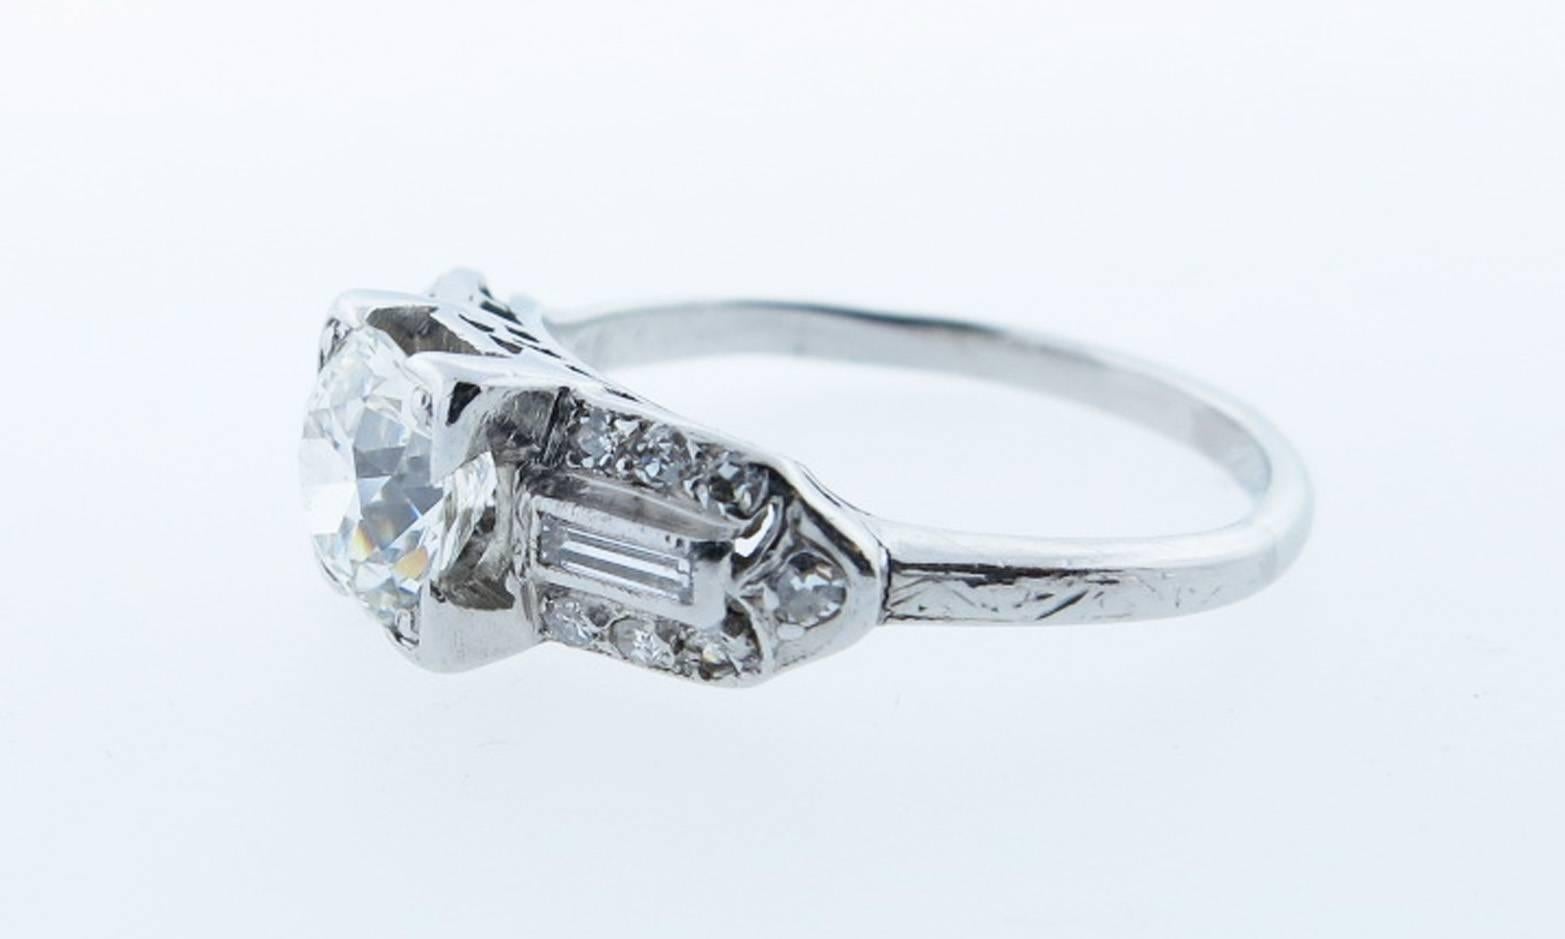 Handmade platinum mount 1.0 ct center round European cut diamond ring grading VS clarity H-I color.The lovely engraved open work mount is bead set on each side with a baguette and seven round old cut diamonds totaling approx  .25cts. Size 5 and can